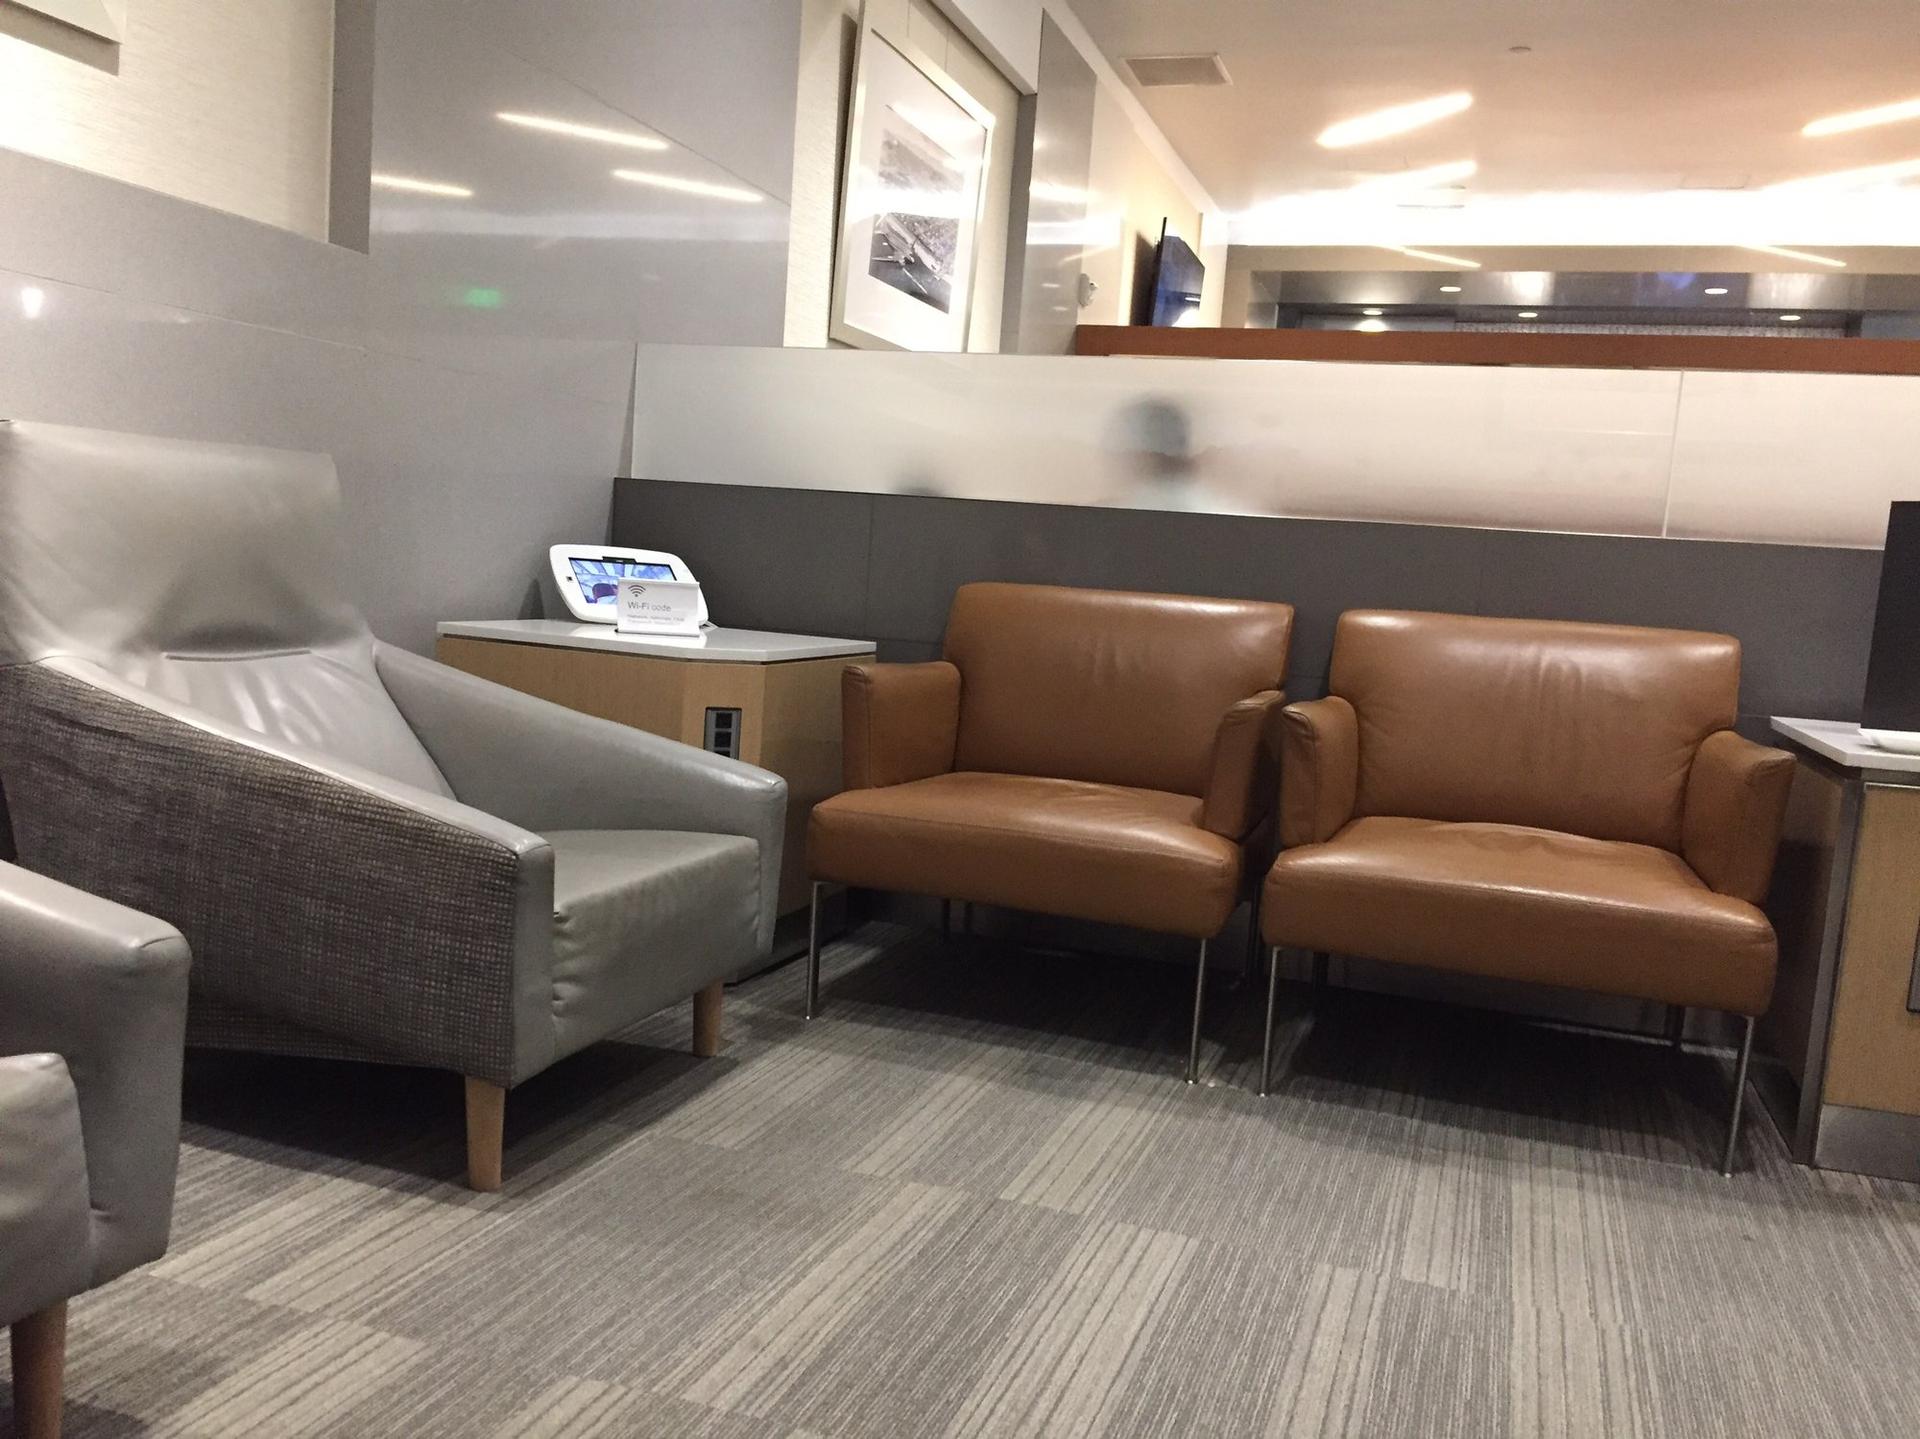 American Airlines Admirals Club image 29 of 43